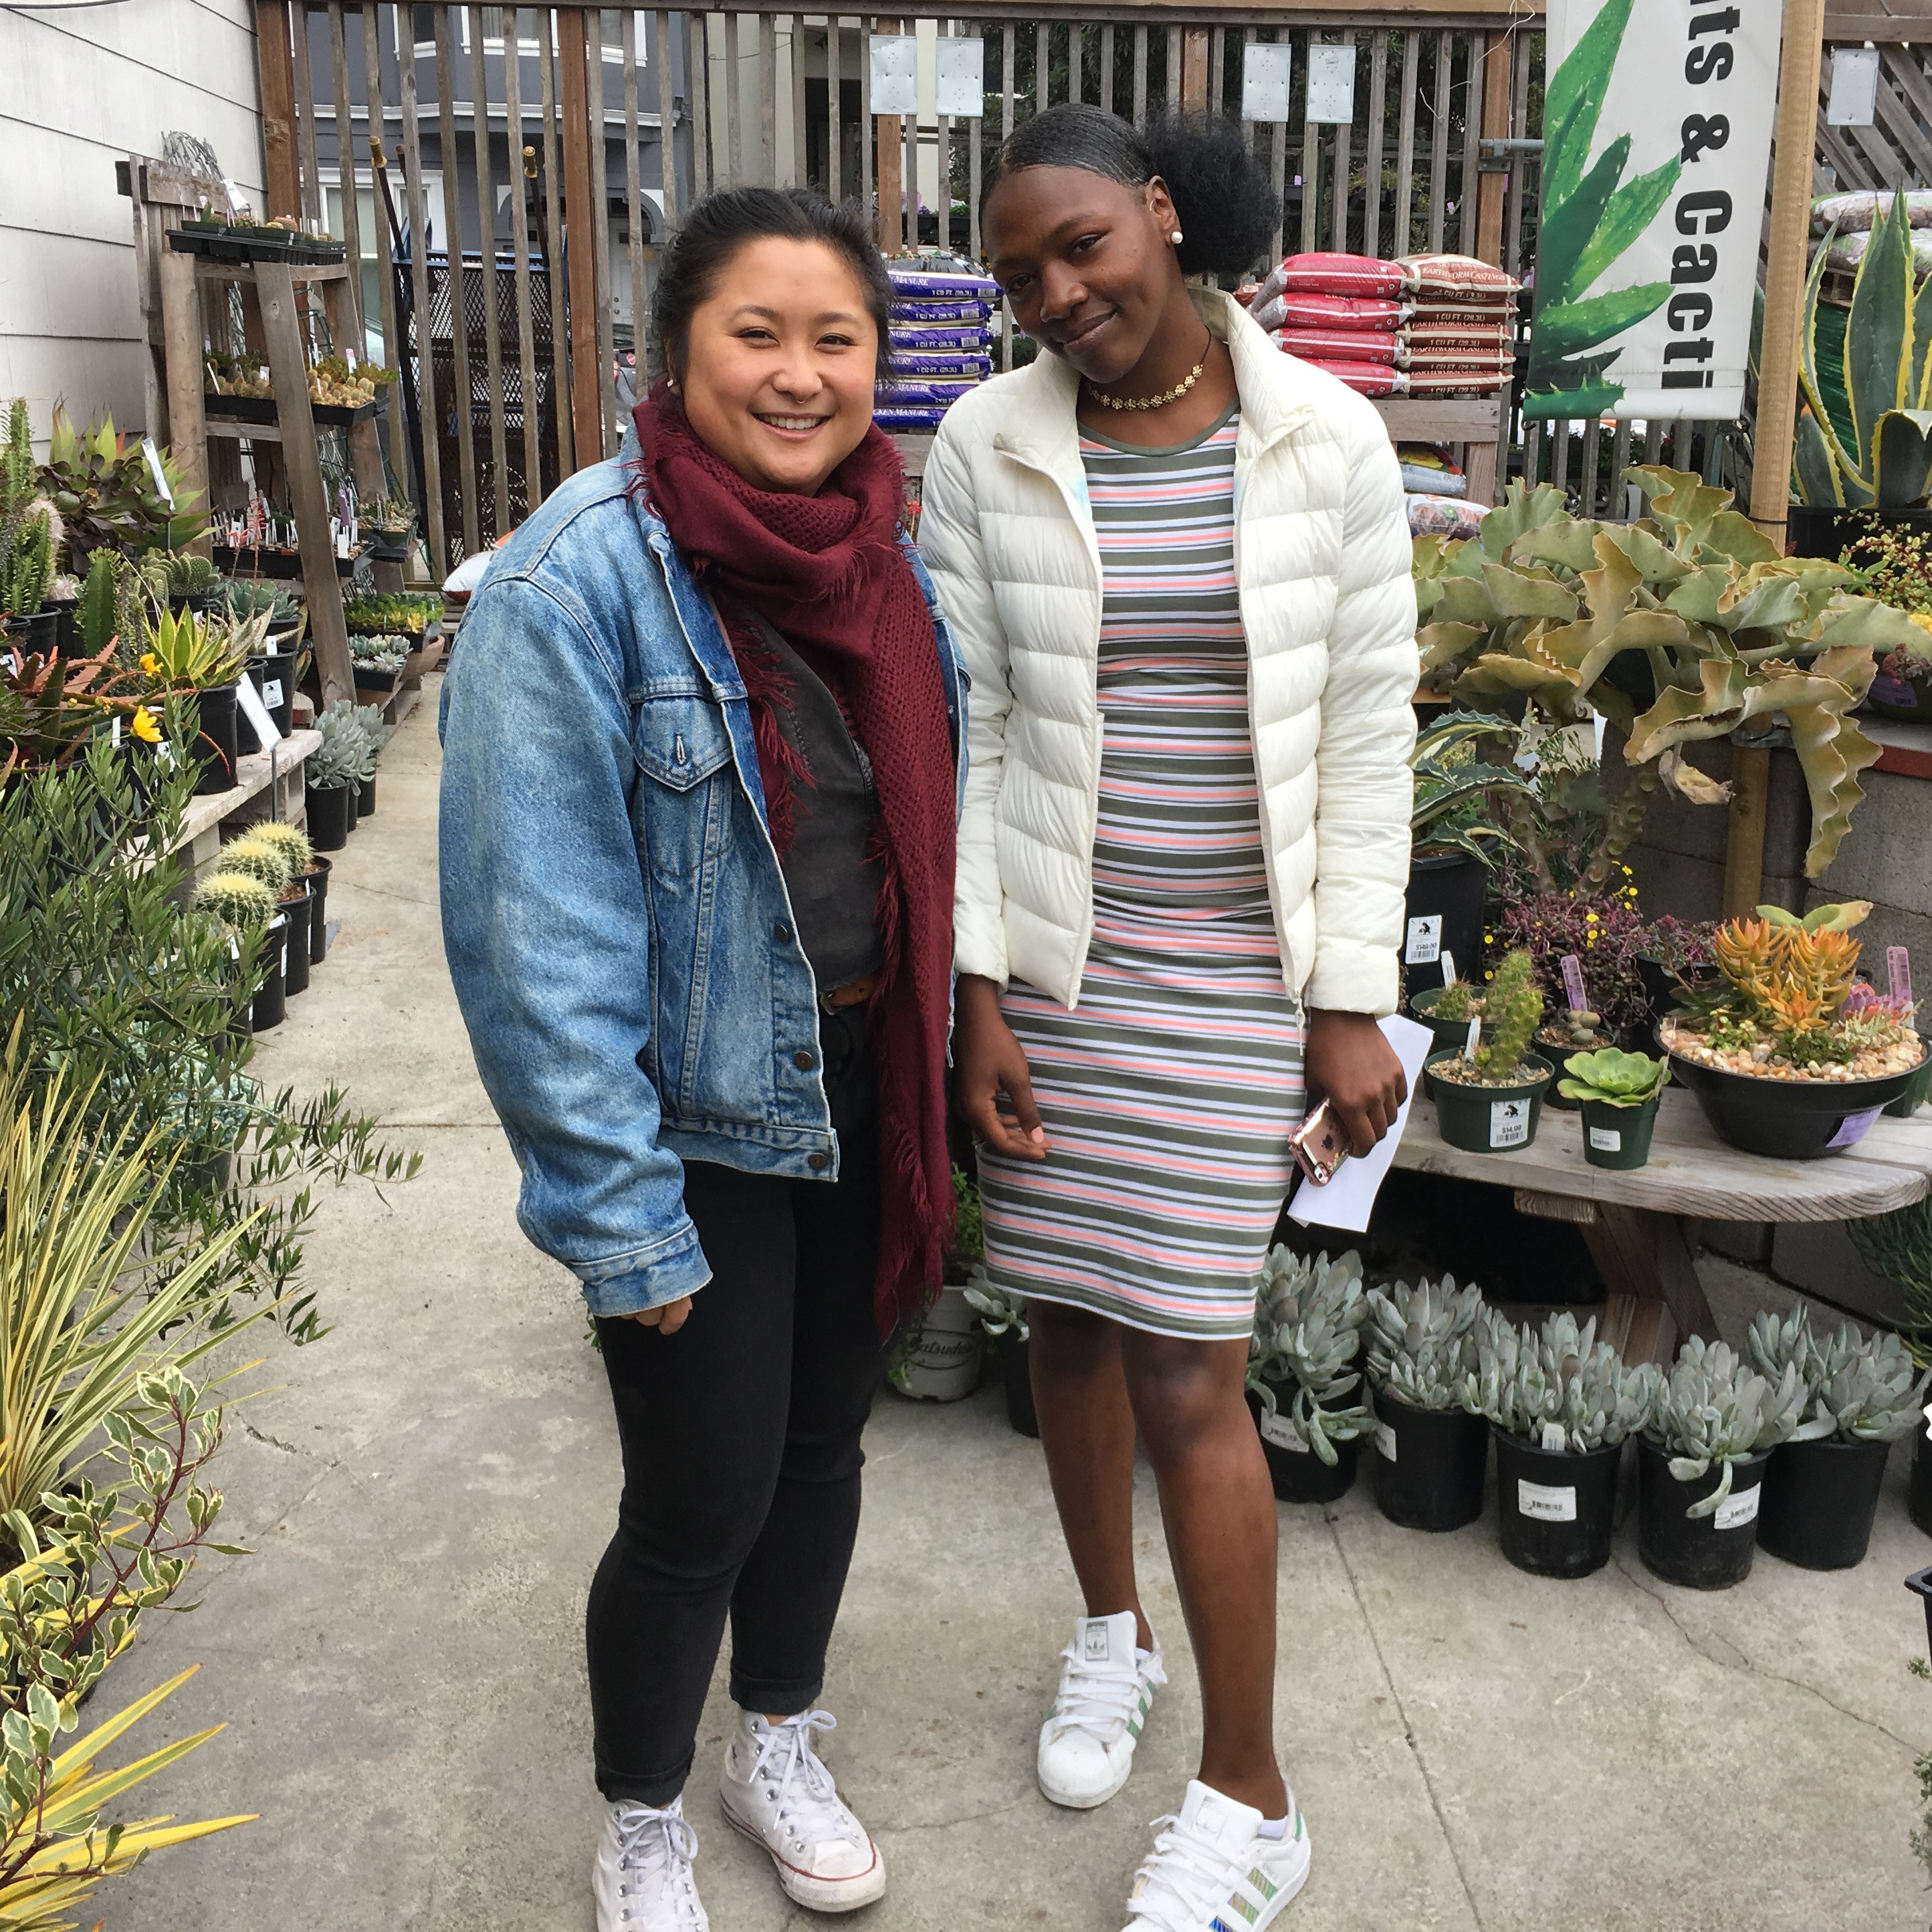 Trang and Brianna stop at a plant shop on an outing together.